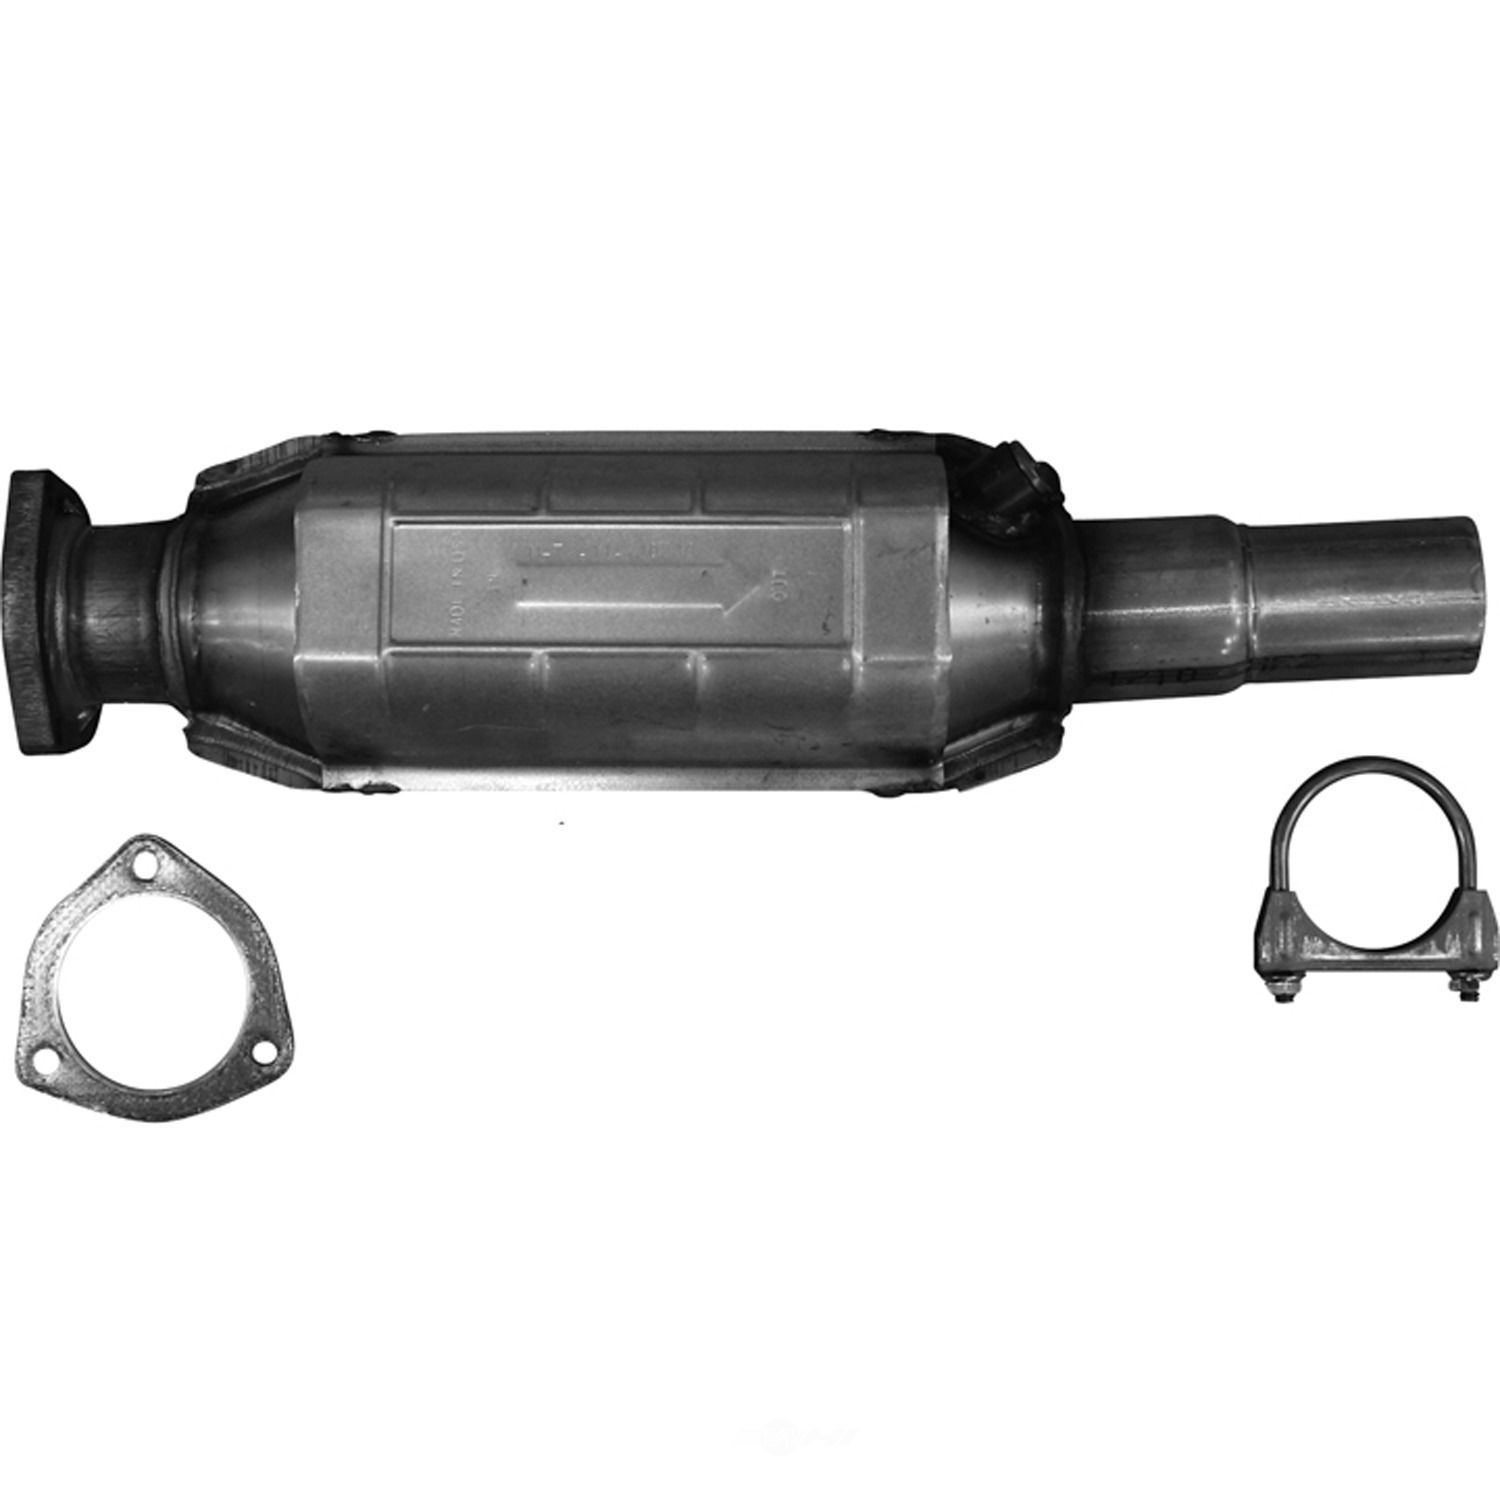 AP EXHAUST W/FEDERAL CONVERTER - Direct Fit Converter - APF 642672